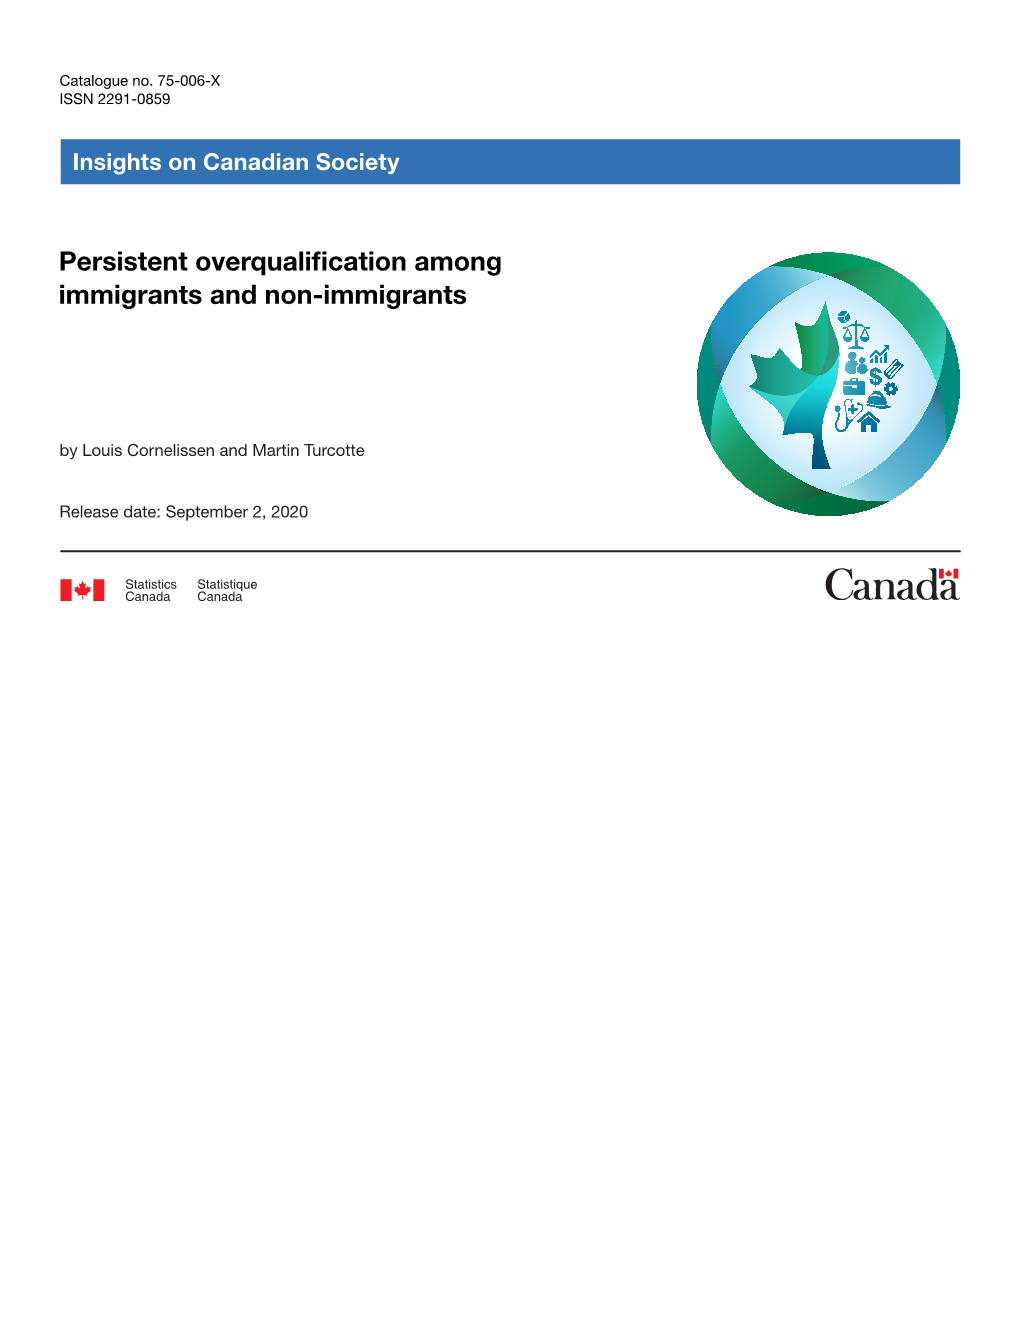 Persistent Overqualification Among Immigrants and Non-Immigrants